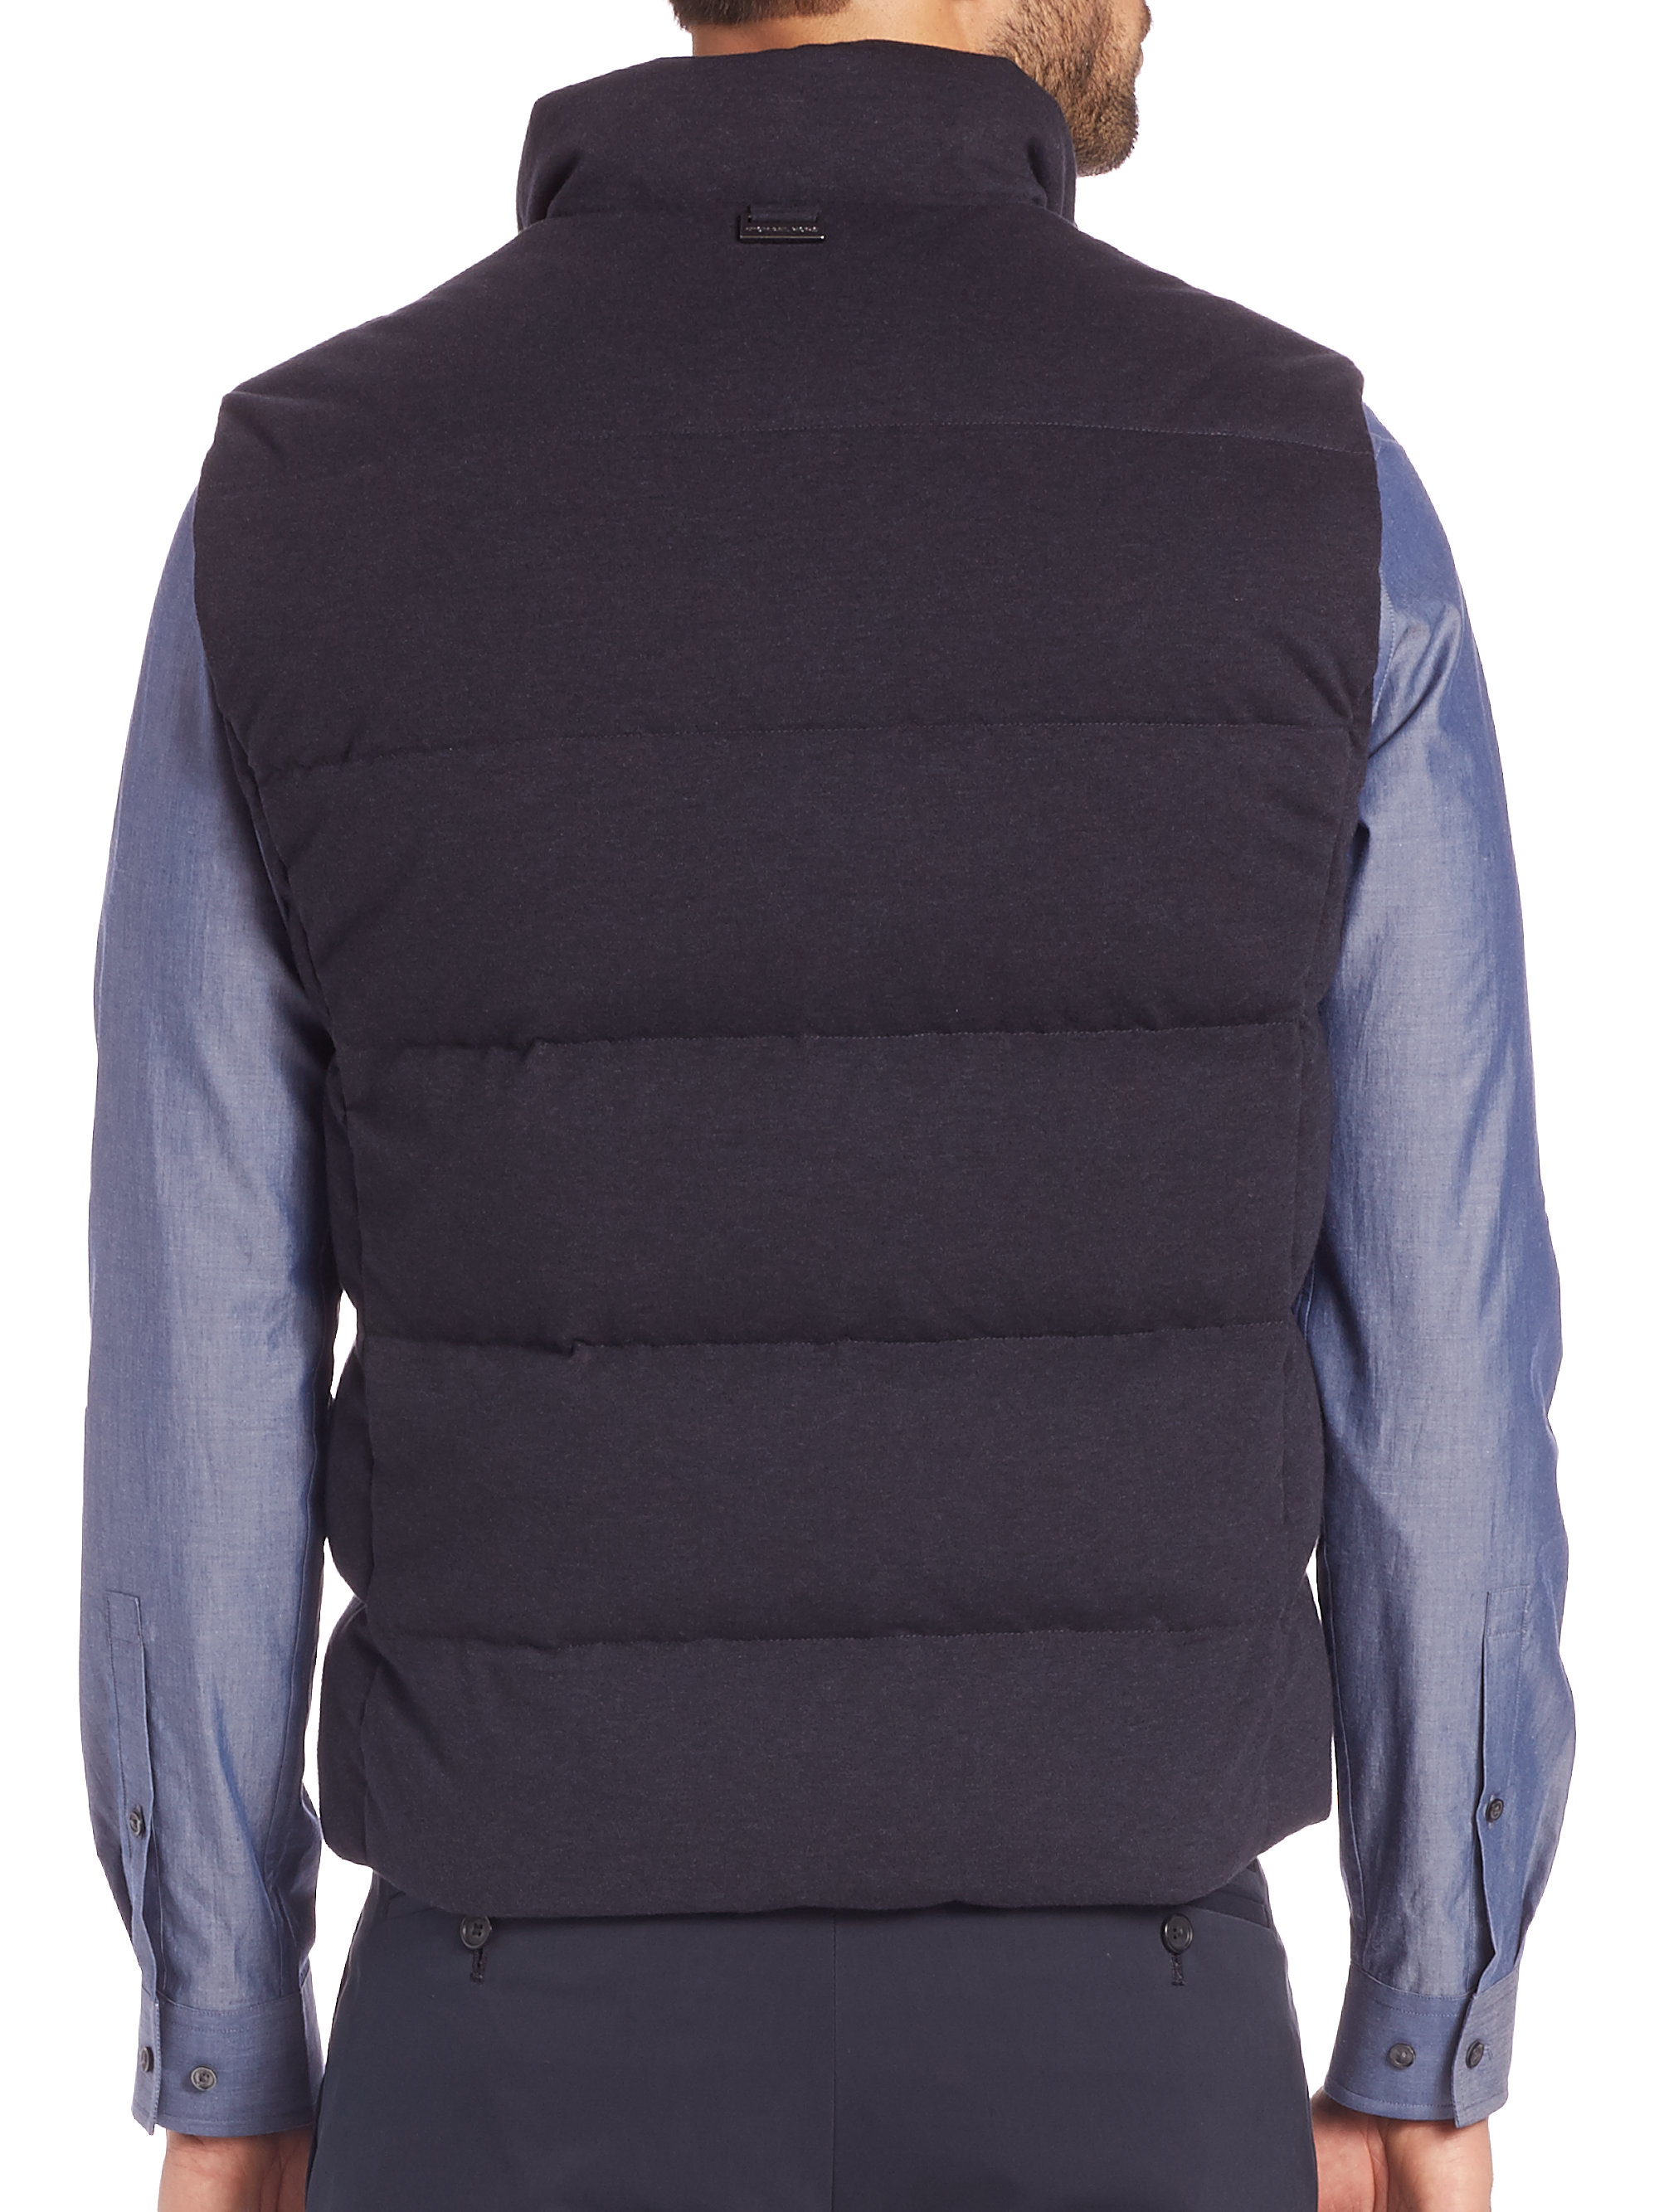 Lyst - Michael Kors Knit Quilted Down Vest in Blue for Men